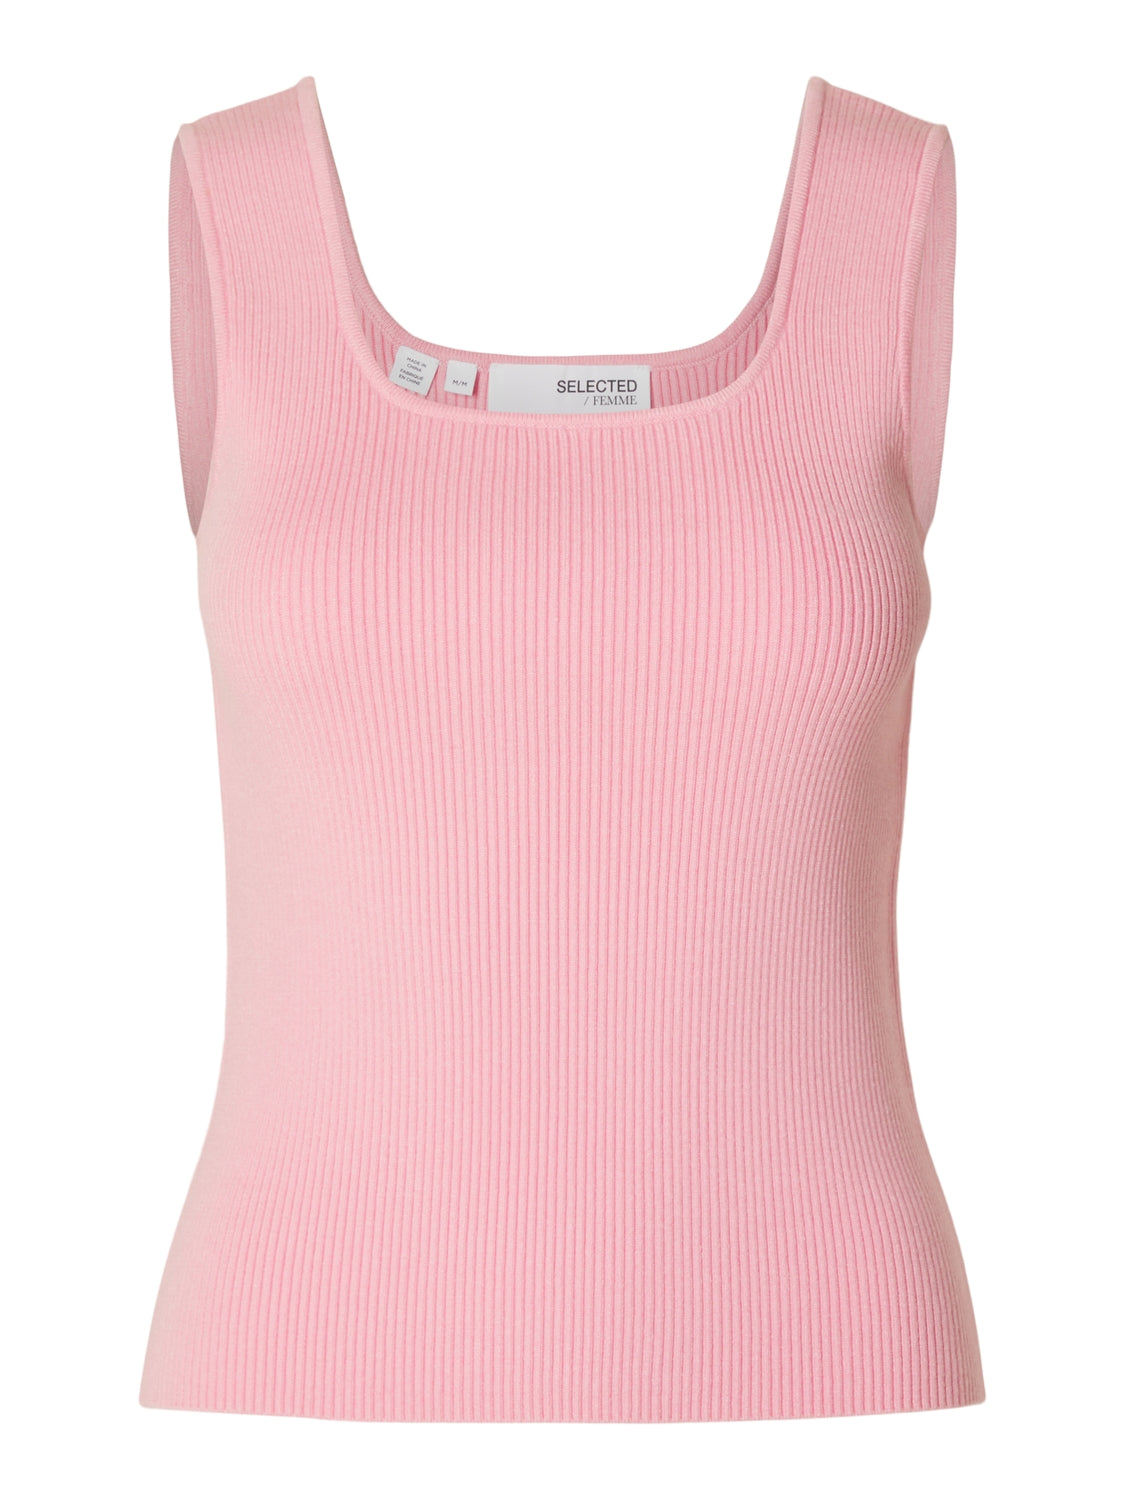 Selected Femme "Jenny" Knit Top pink